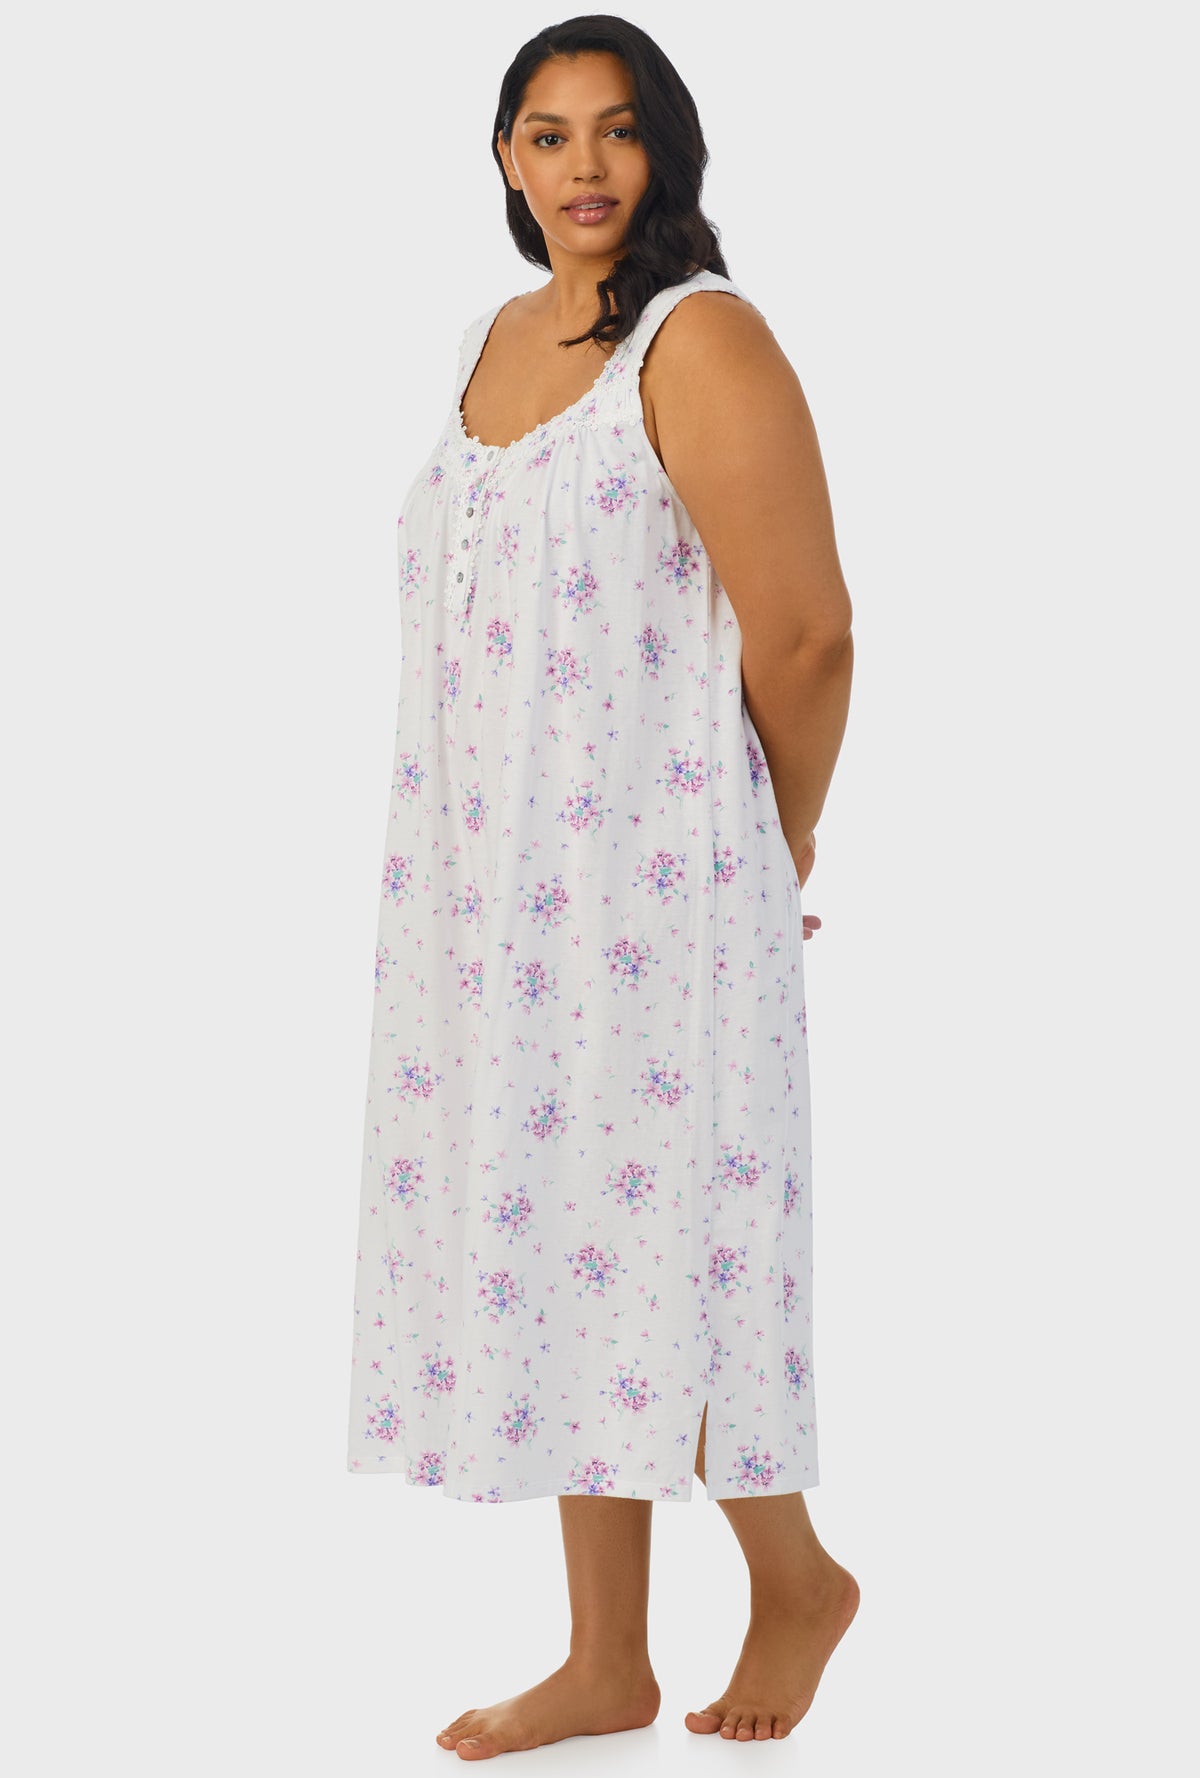 A lady wearing white sleeveless ballet plus size gown with Mulberry Purple Floral Bouquet print.